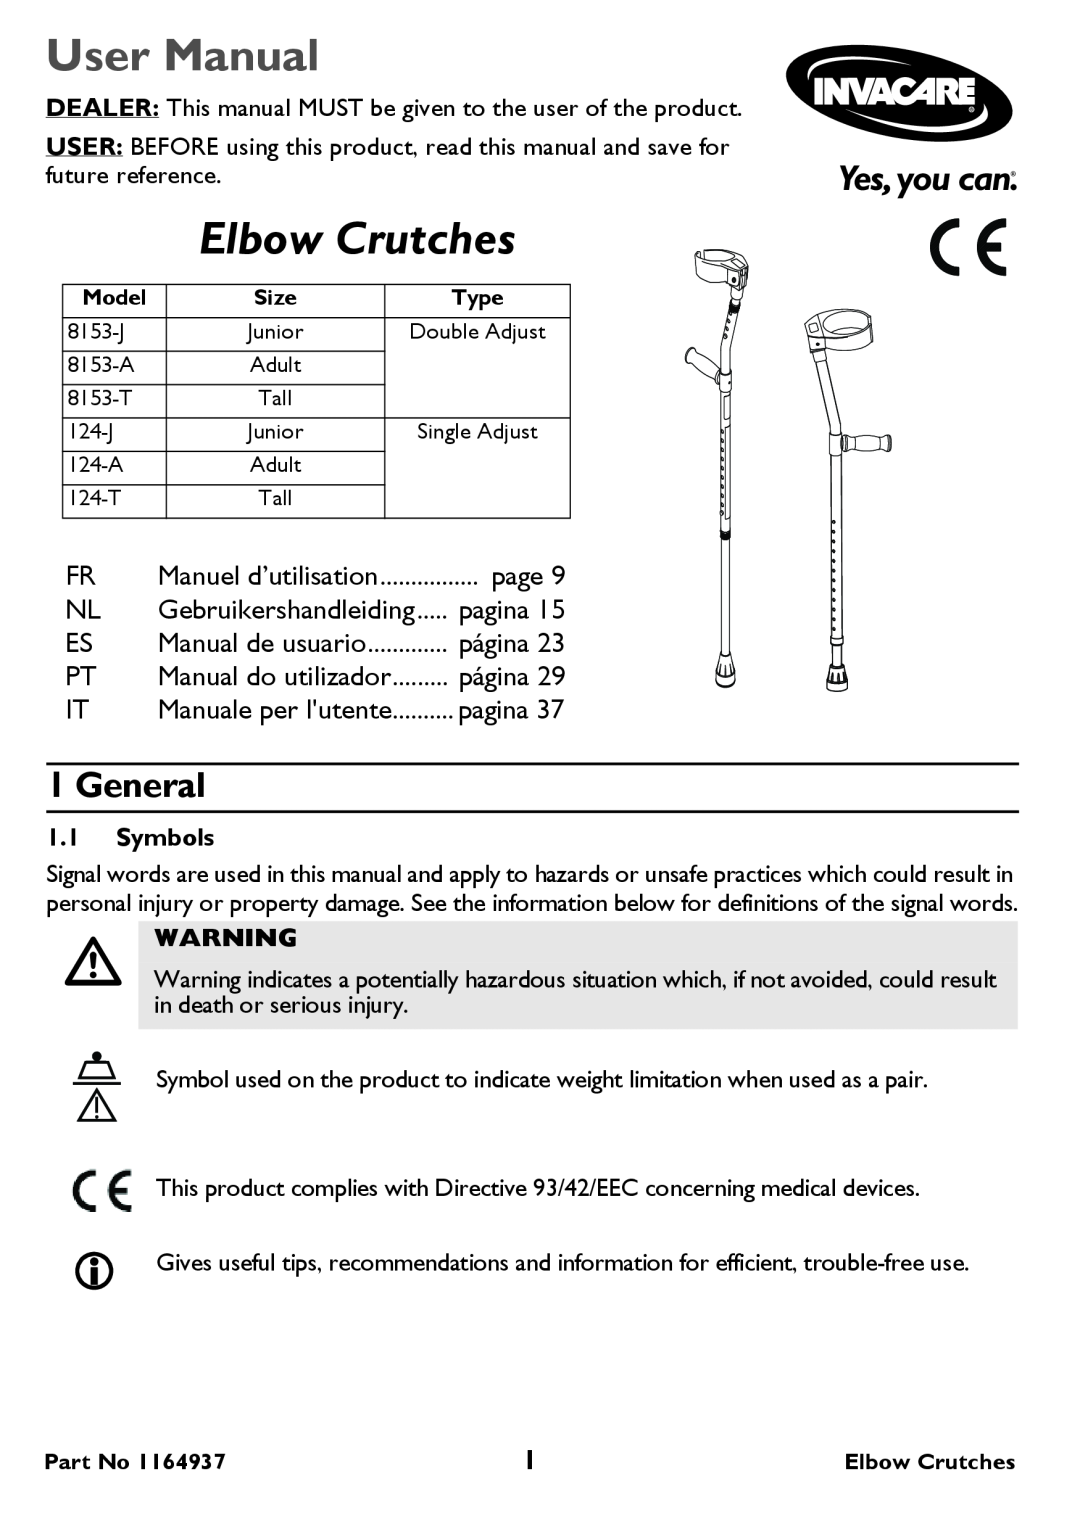 Invacare 8153-T Tall, 8153-A Adult user manual User Manual, Elbow Crutches, General, Symbols, page, página, pagina 